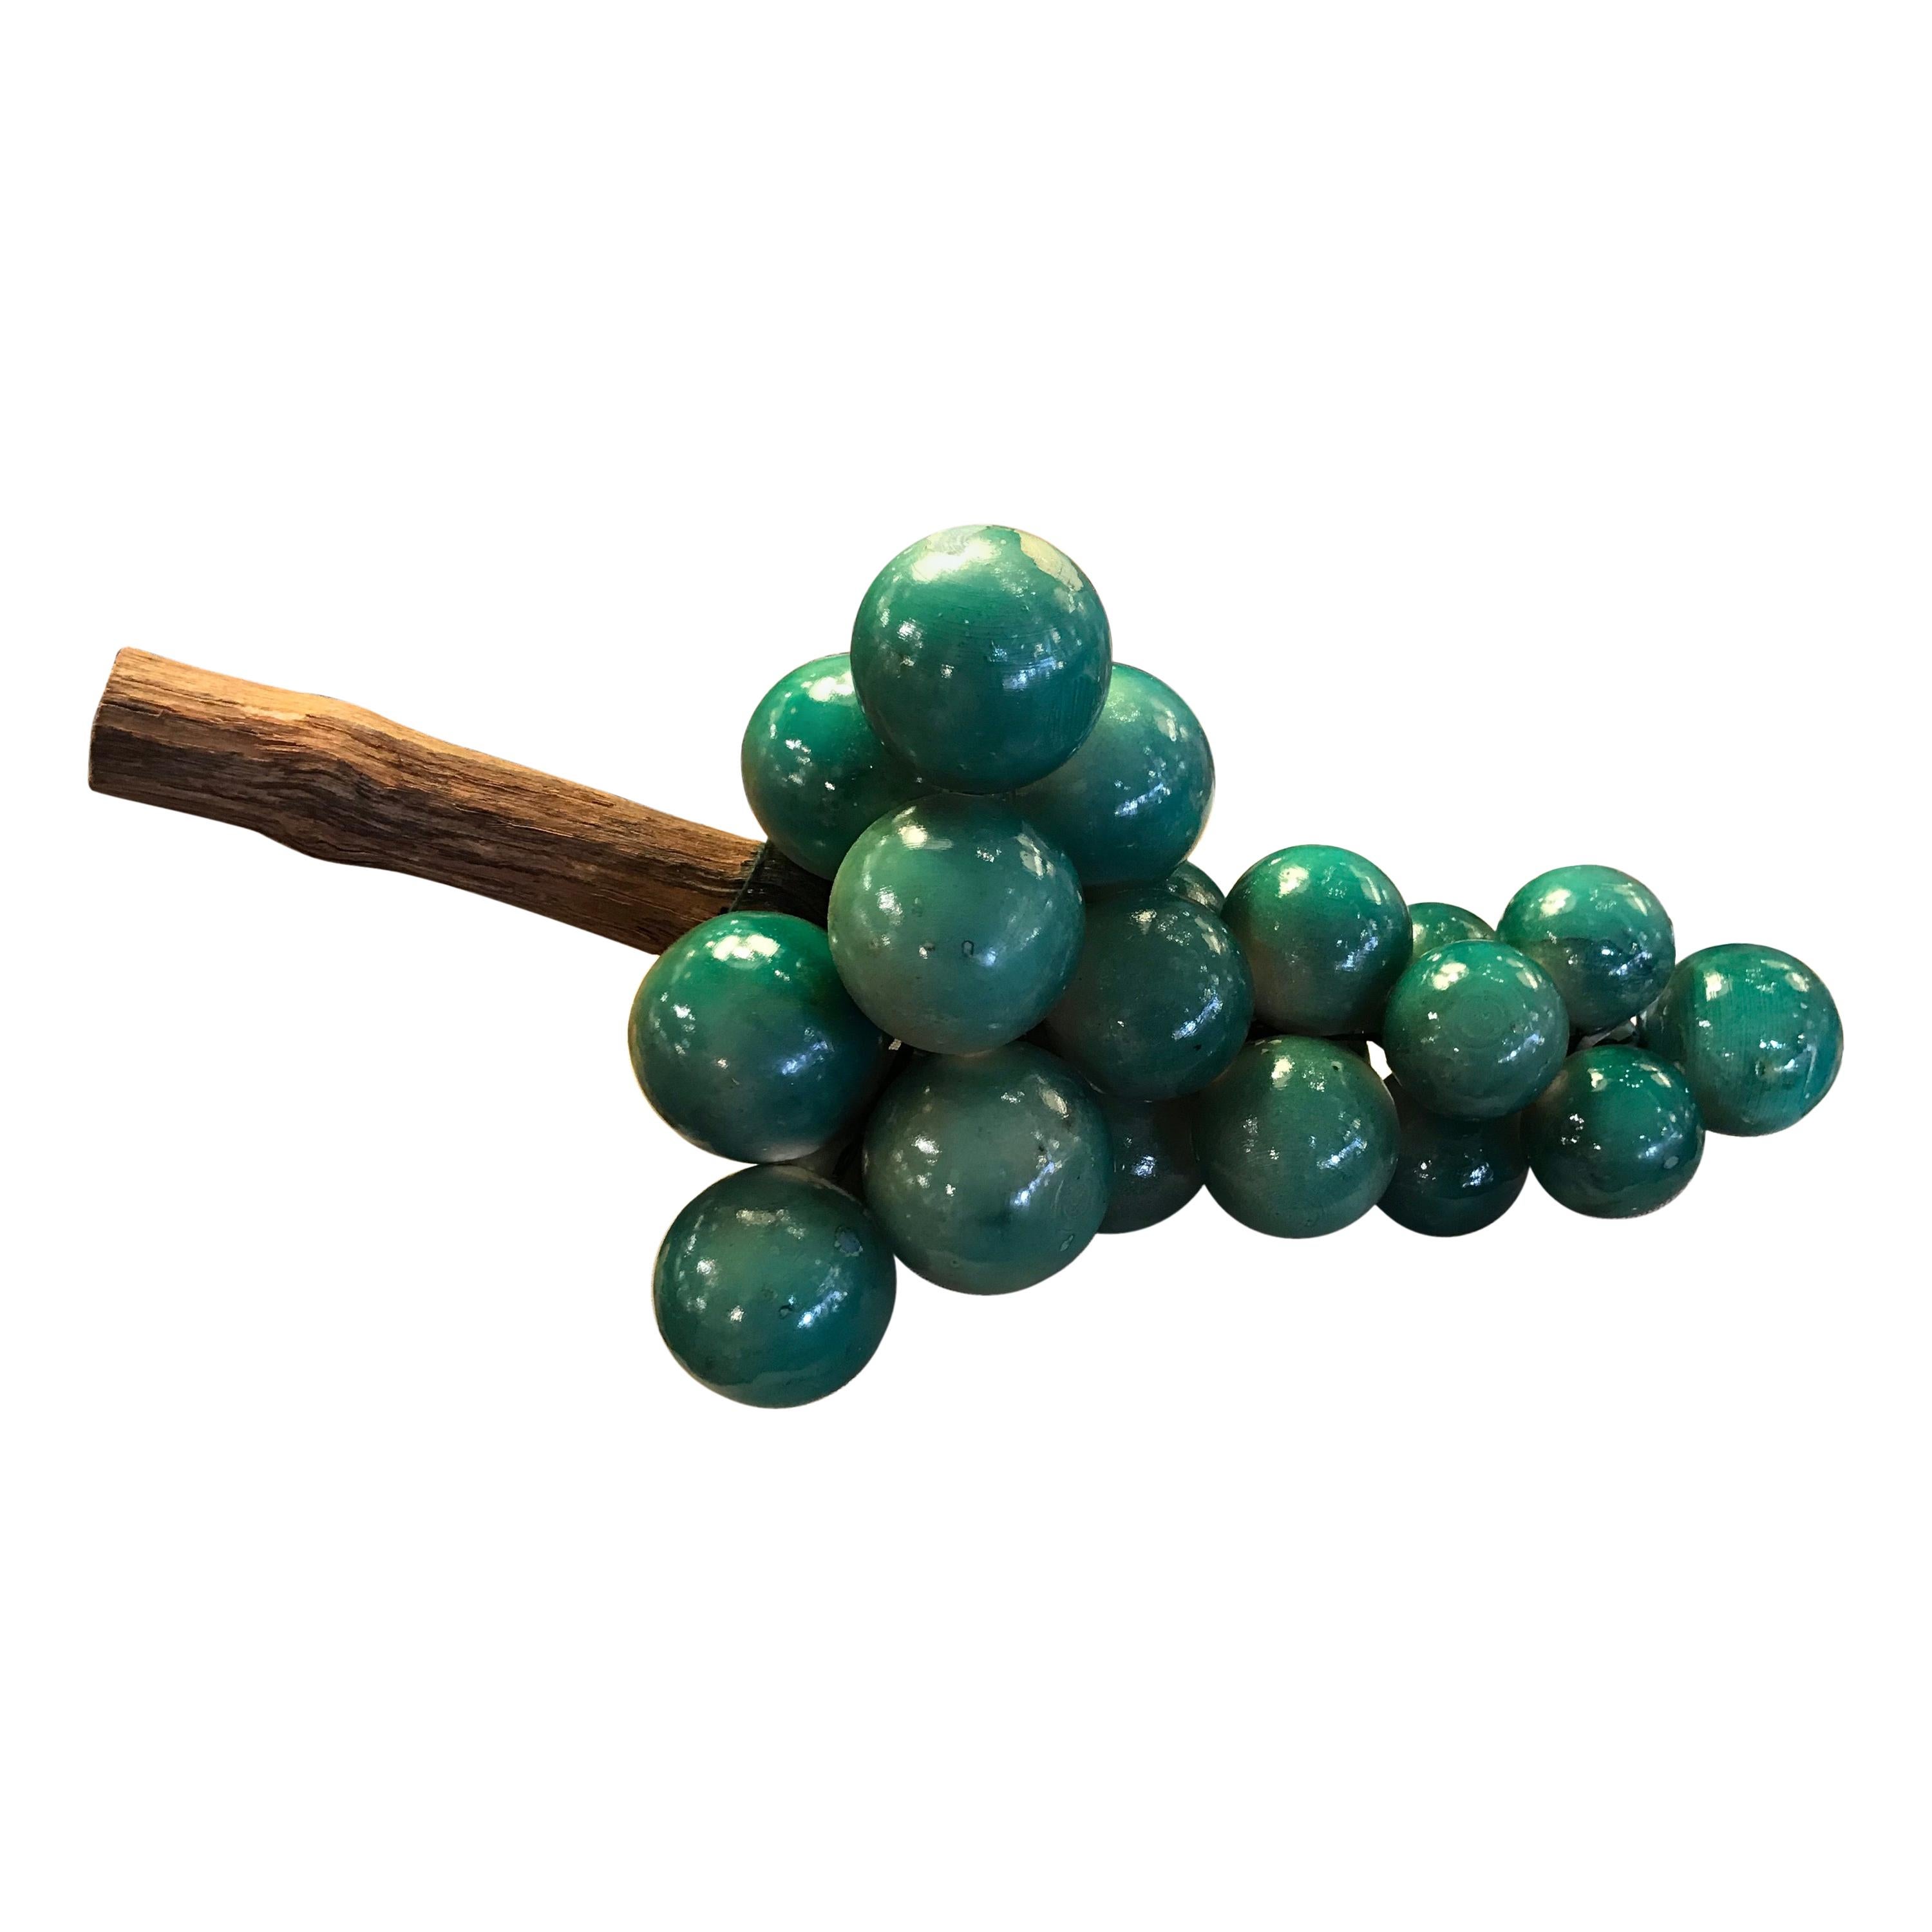 Large Alabaster Turquoise Grapes